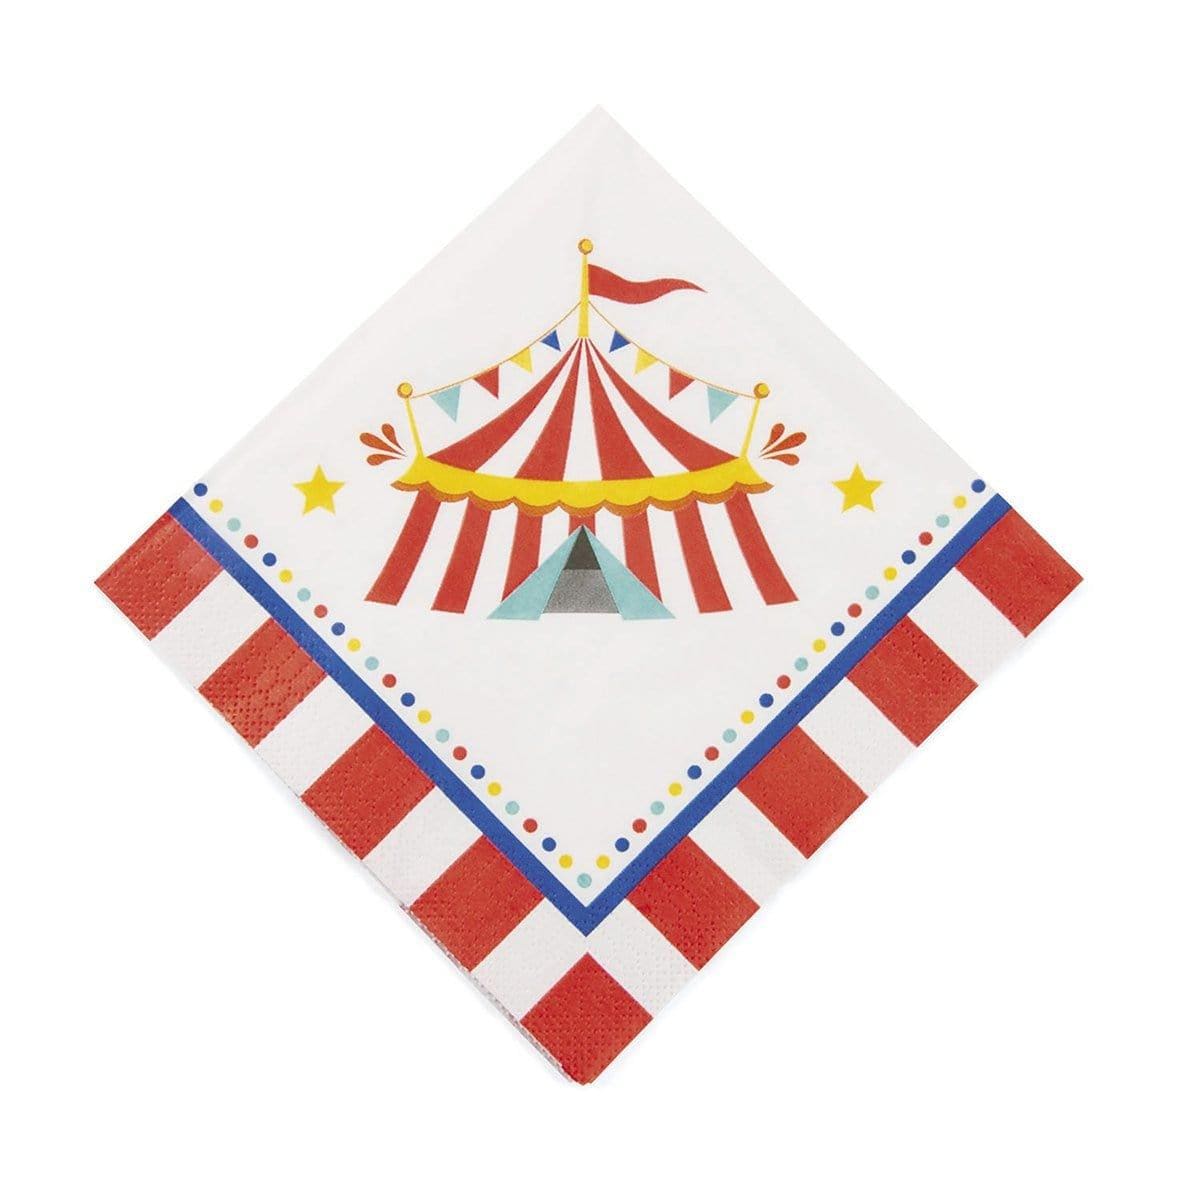 Buy Kids Birthday Carnival lunch napkins, 16 per package sold at Party Expert